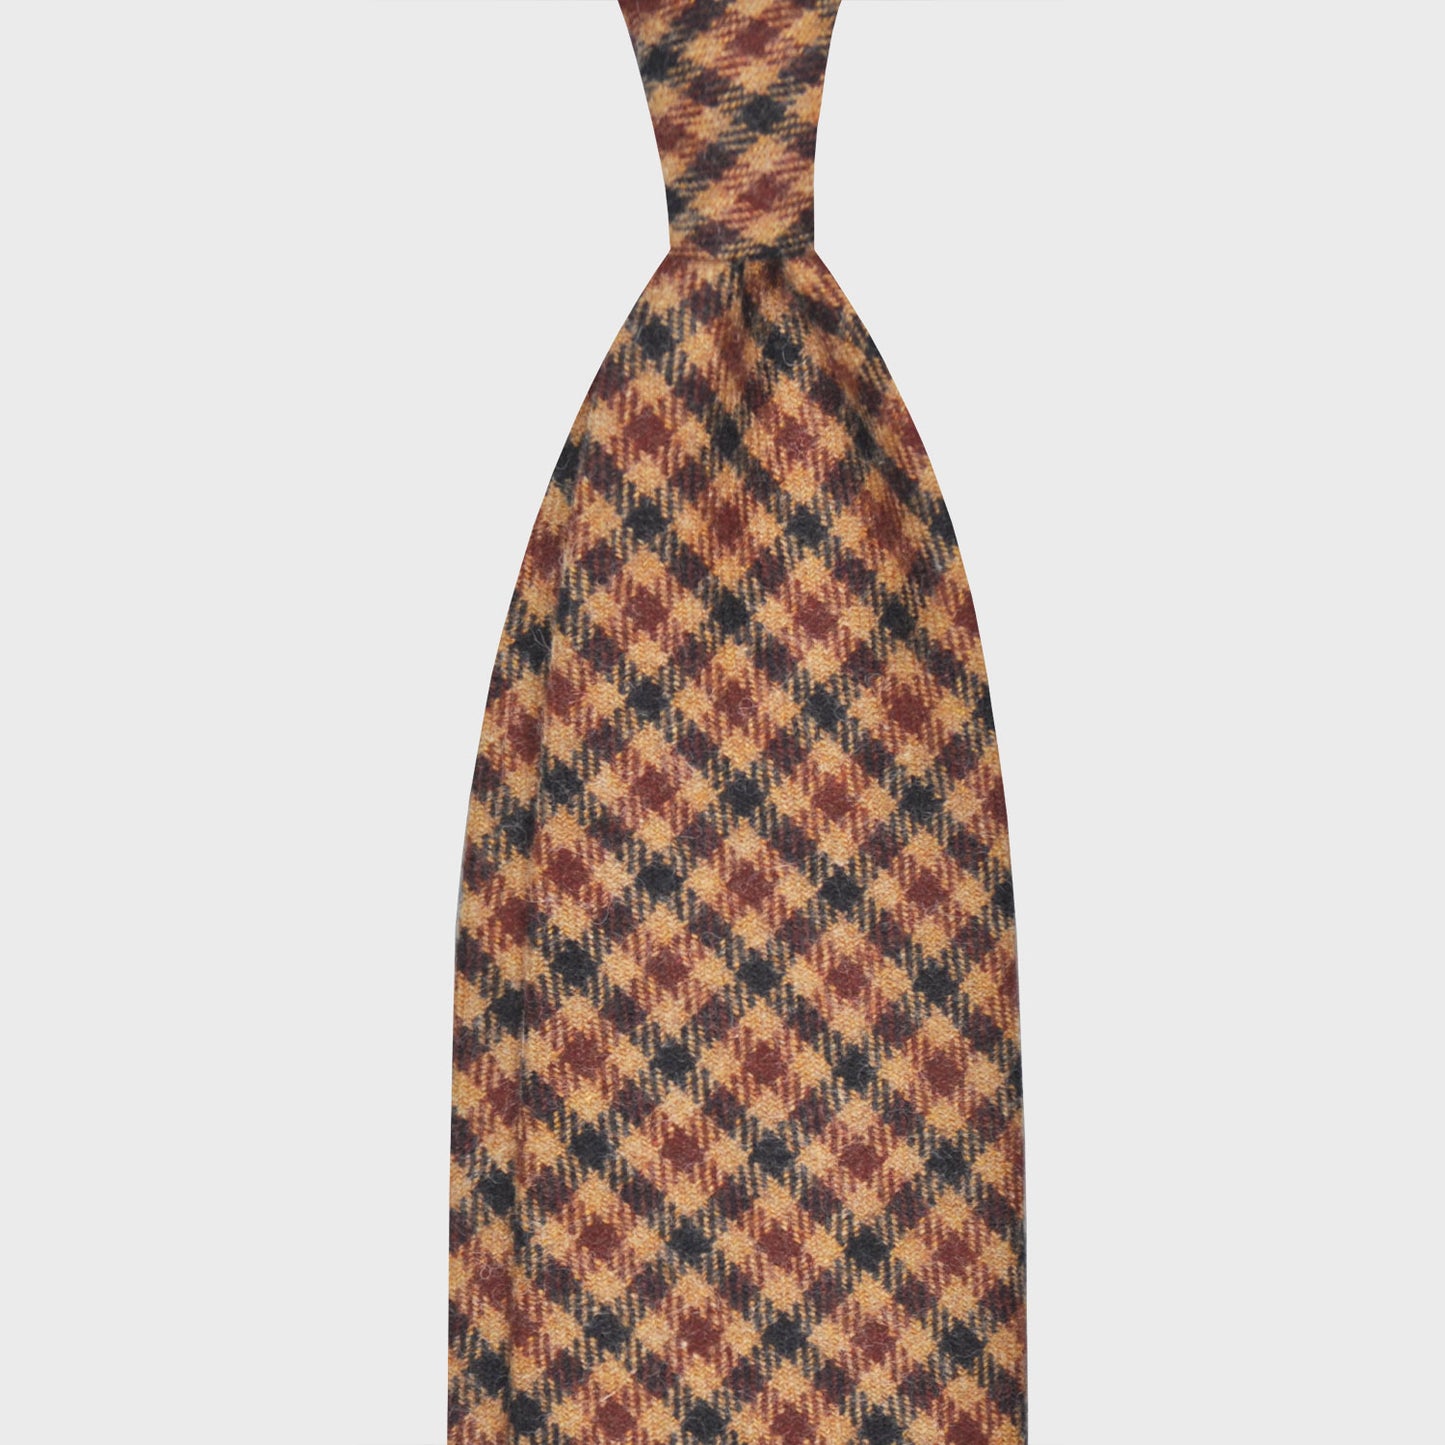 Burgundy Red Checked Flannel Wool Unlined Tie. Refined gun club flannel wool tie, handmade f marino napoli ties for Wools Boutique Uomo, checked pattern camel brown background, navy blue, burgundy red. 